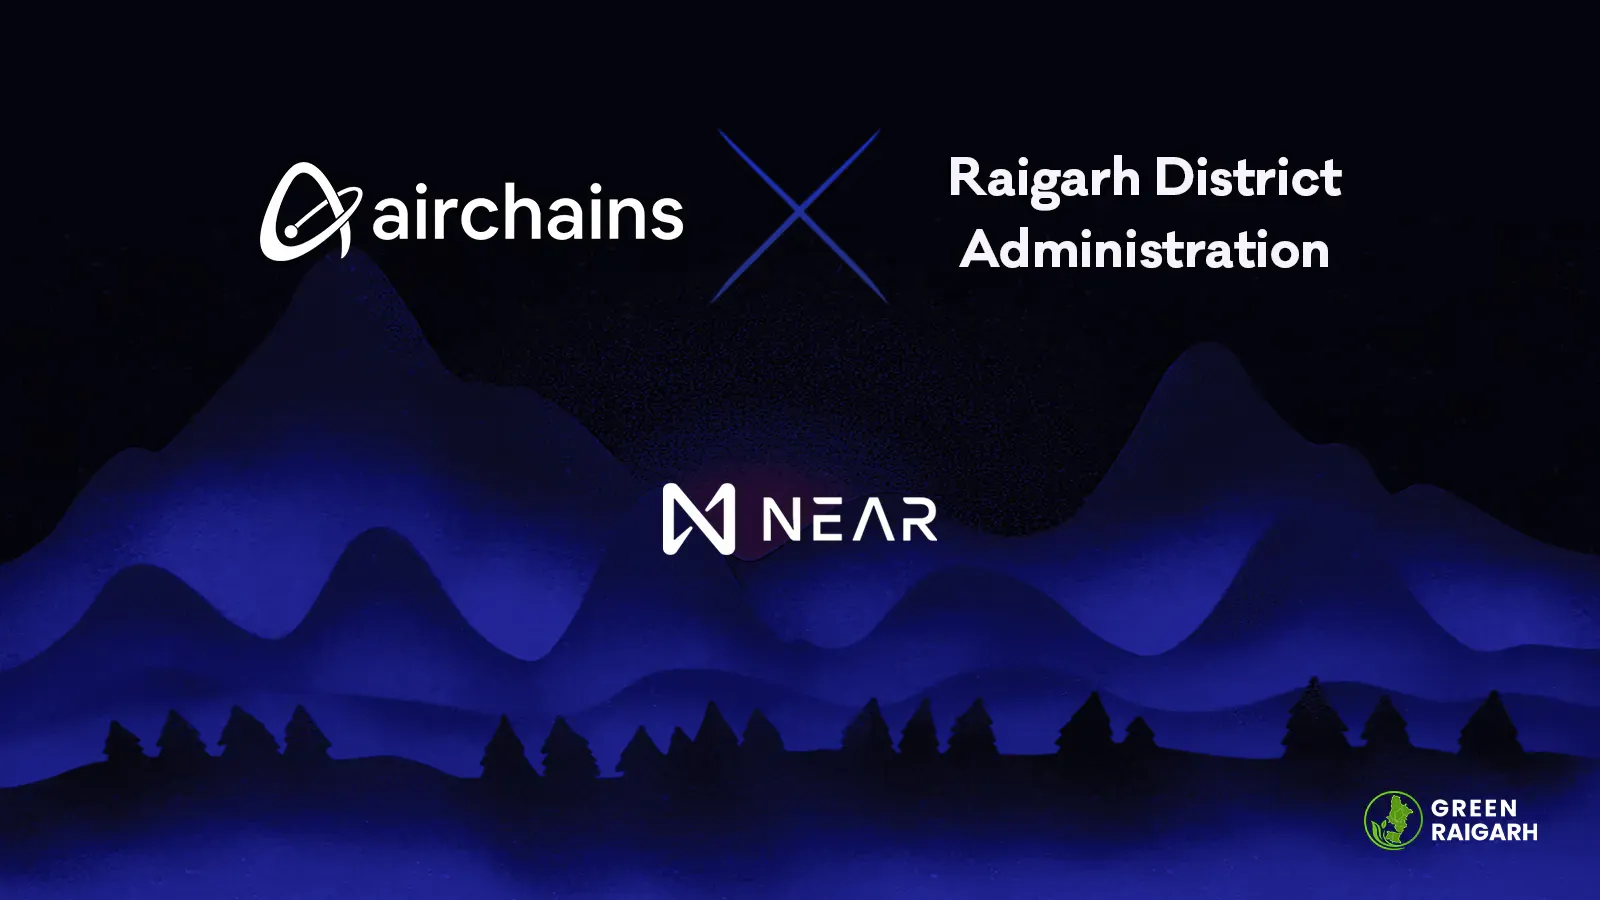 Empowering CSR Efforts: Raigarh Implements Blockchain-backed Plantation Solutions with Airchains and Near Foundation